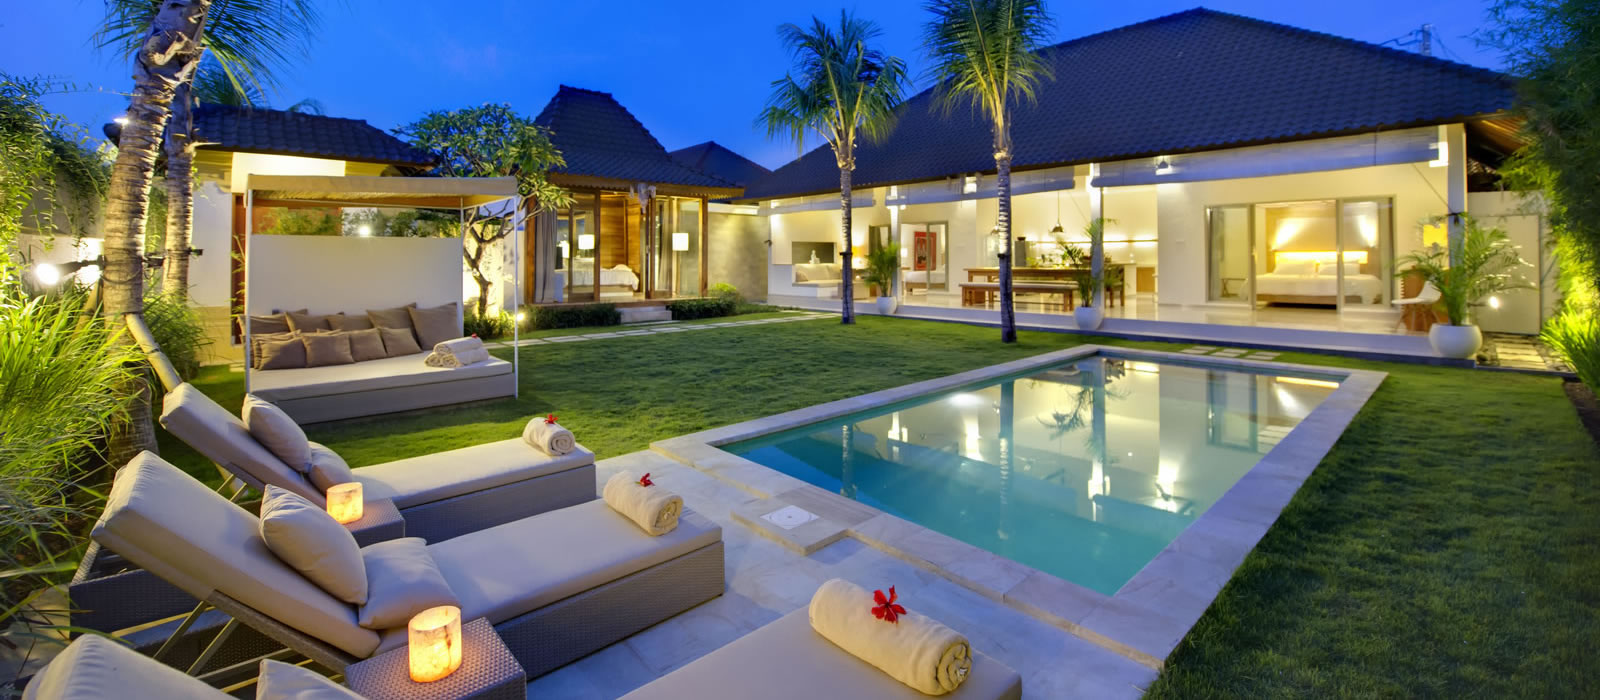 Fantastic deals on Bali villas for sale! - InTouch Realty